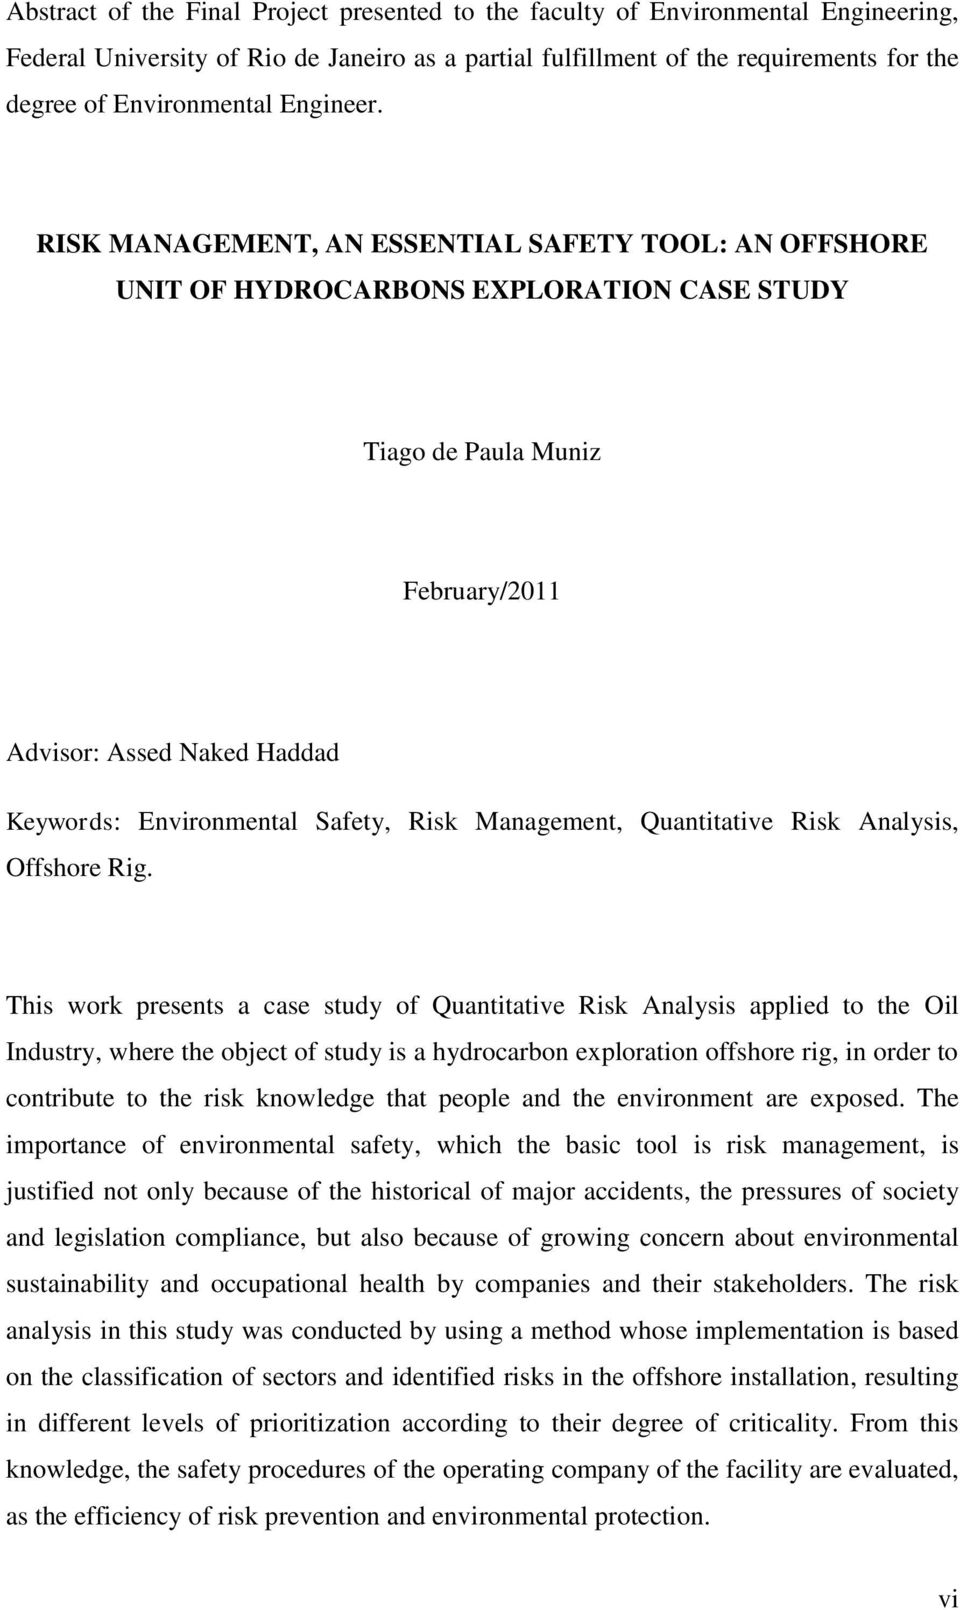 RISK MANAGEMENT, AN ESSENTIAL SAFETY TOOL: AN OFFSHORE UNIT OF HYDROCARBONS EXPLORATION CASE STUDY Tiago de Paula Muniz February/2011 Advisor: Assed Naked Haddad Keywords: Environmental Safety, Risk